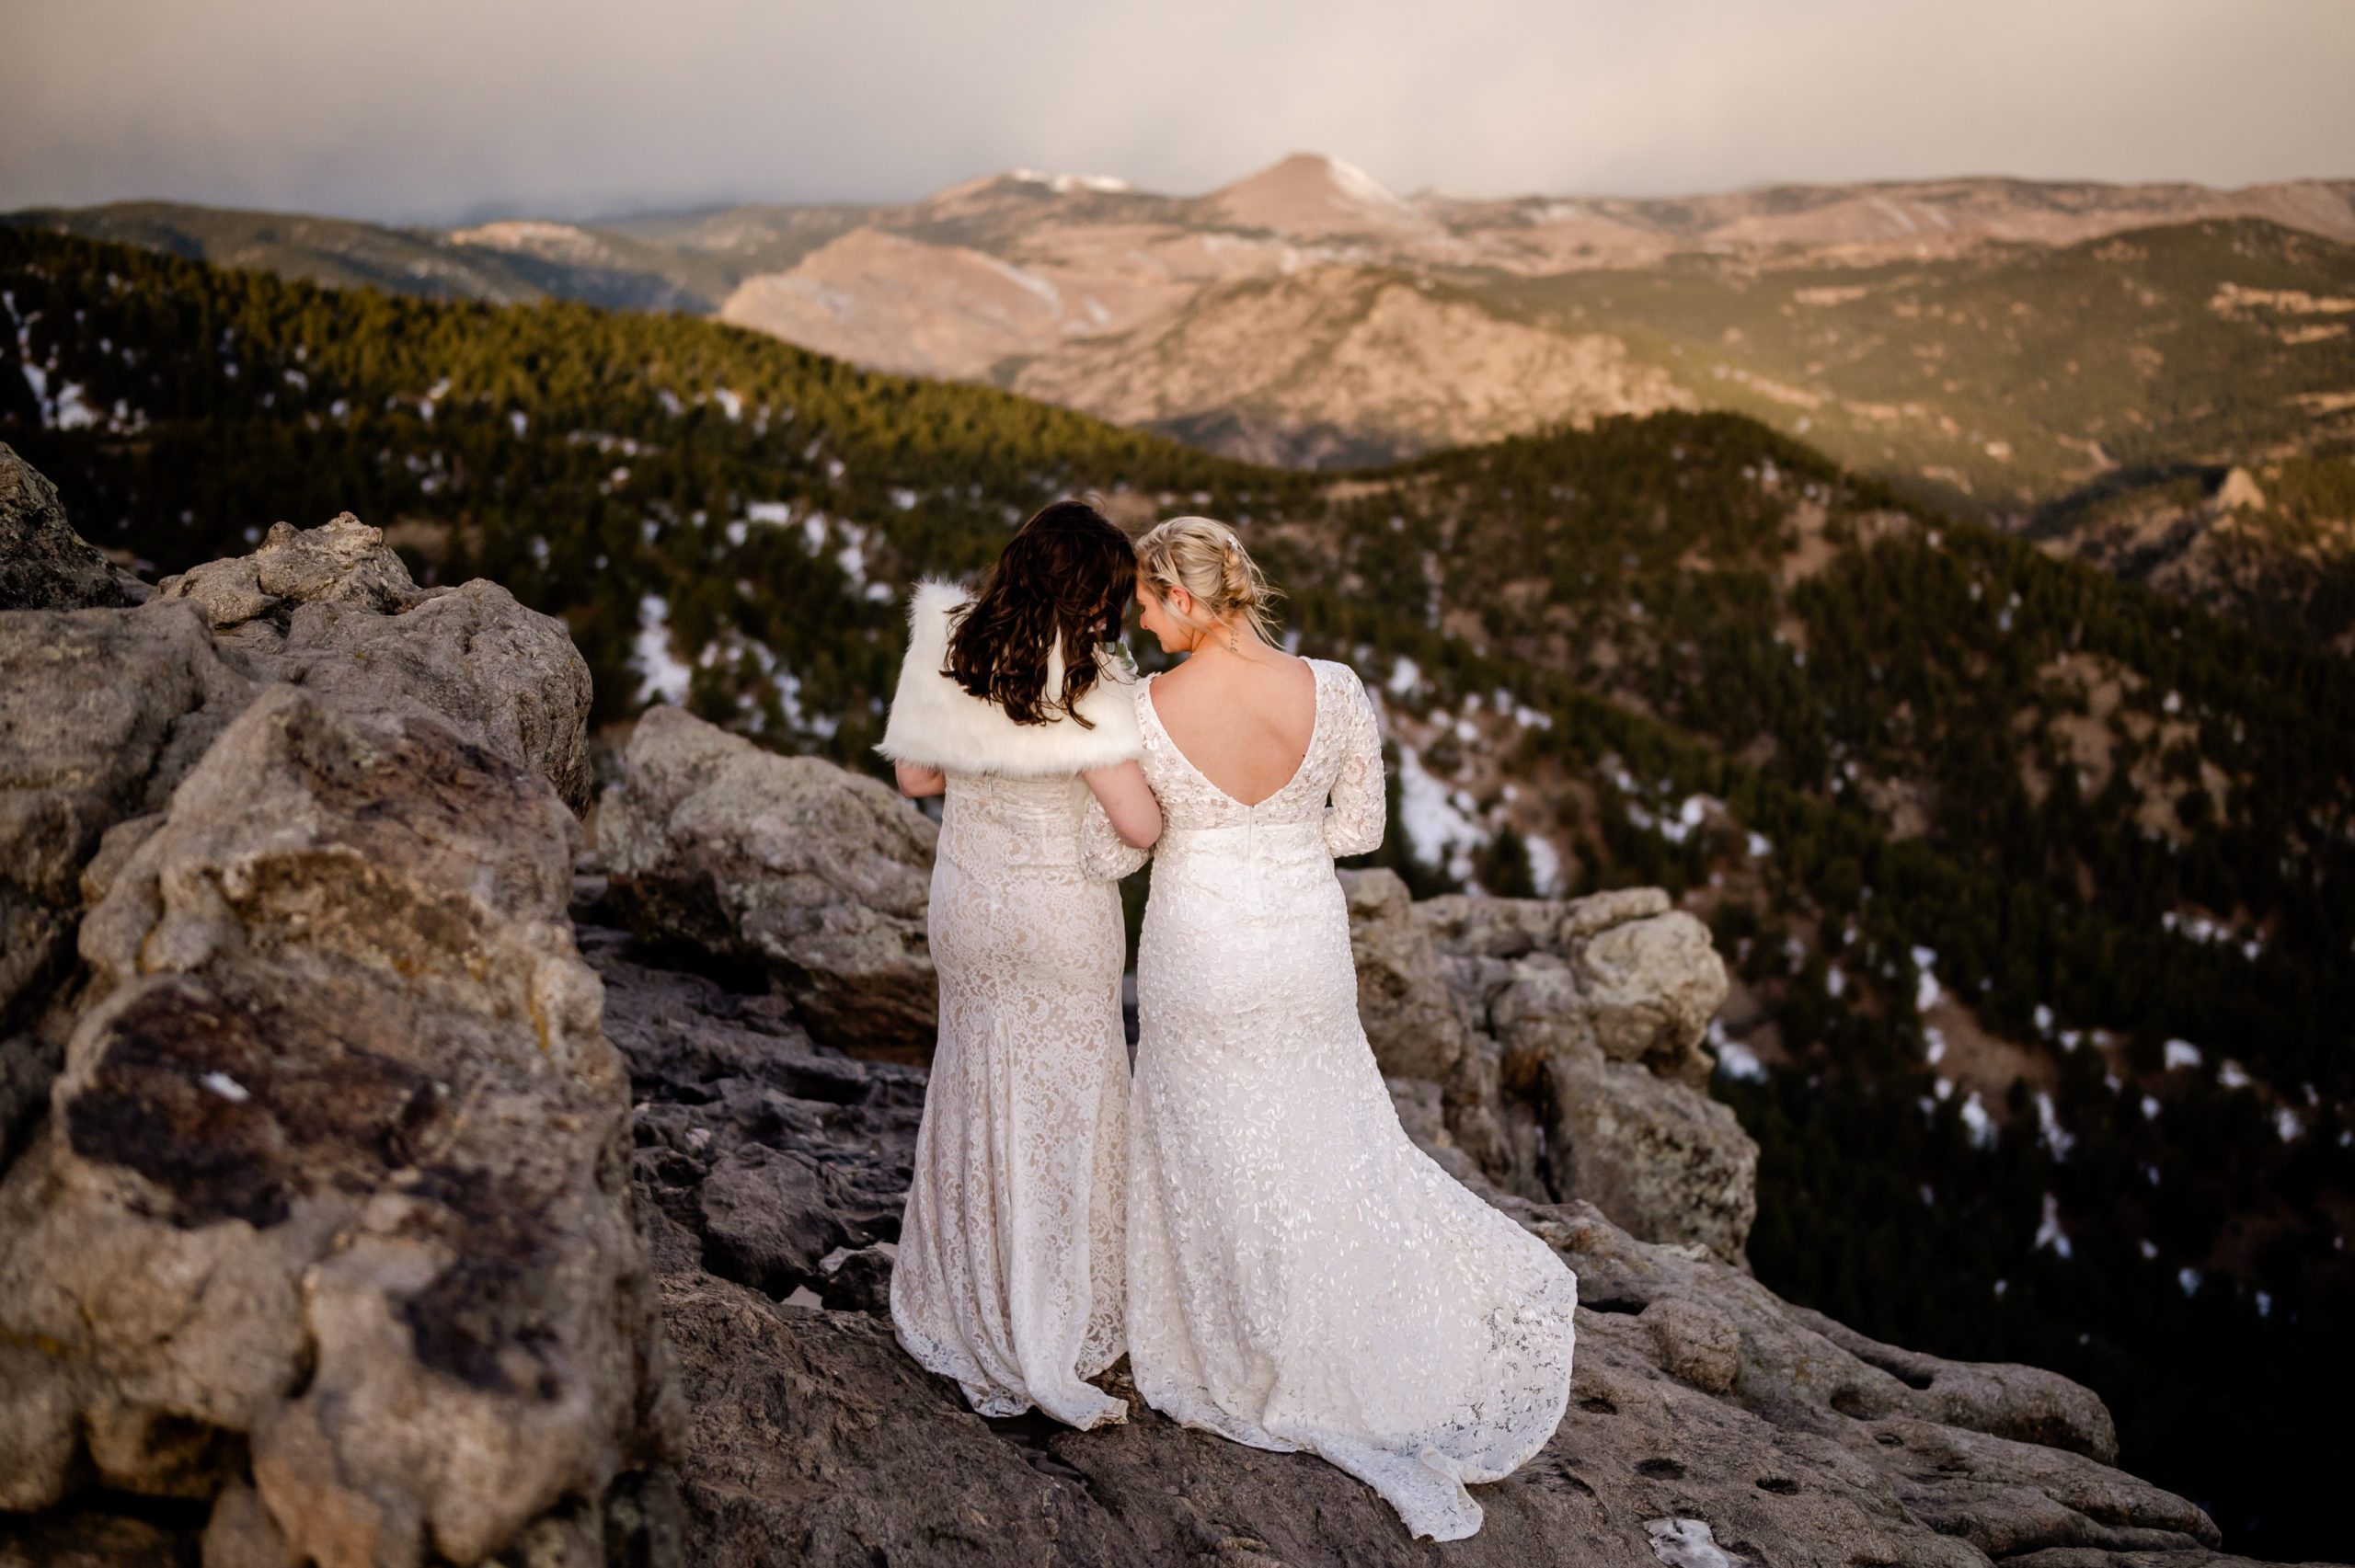 Two brides embracing at Lost Gulch Overlook in Colorado after their sunrise elopement ceremony, Cost to elope